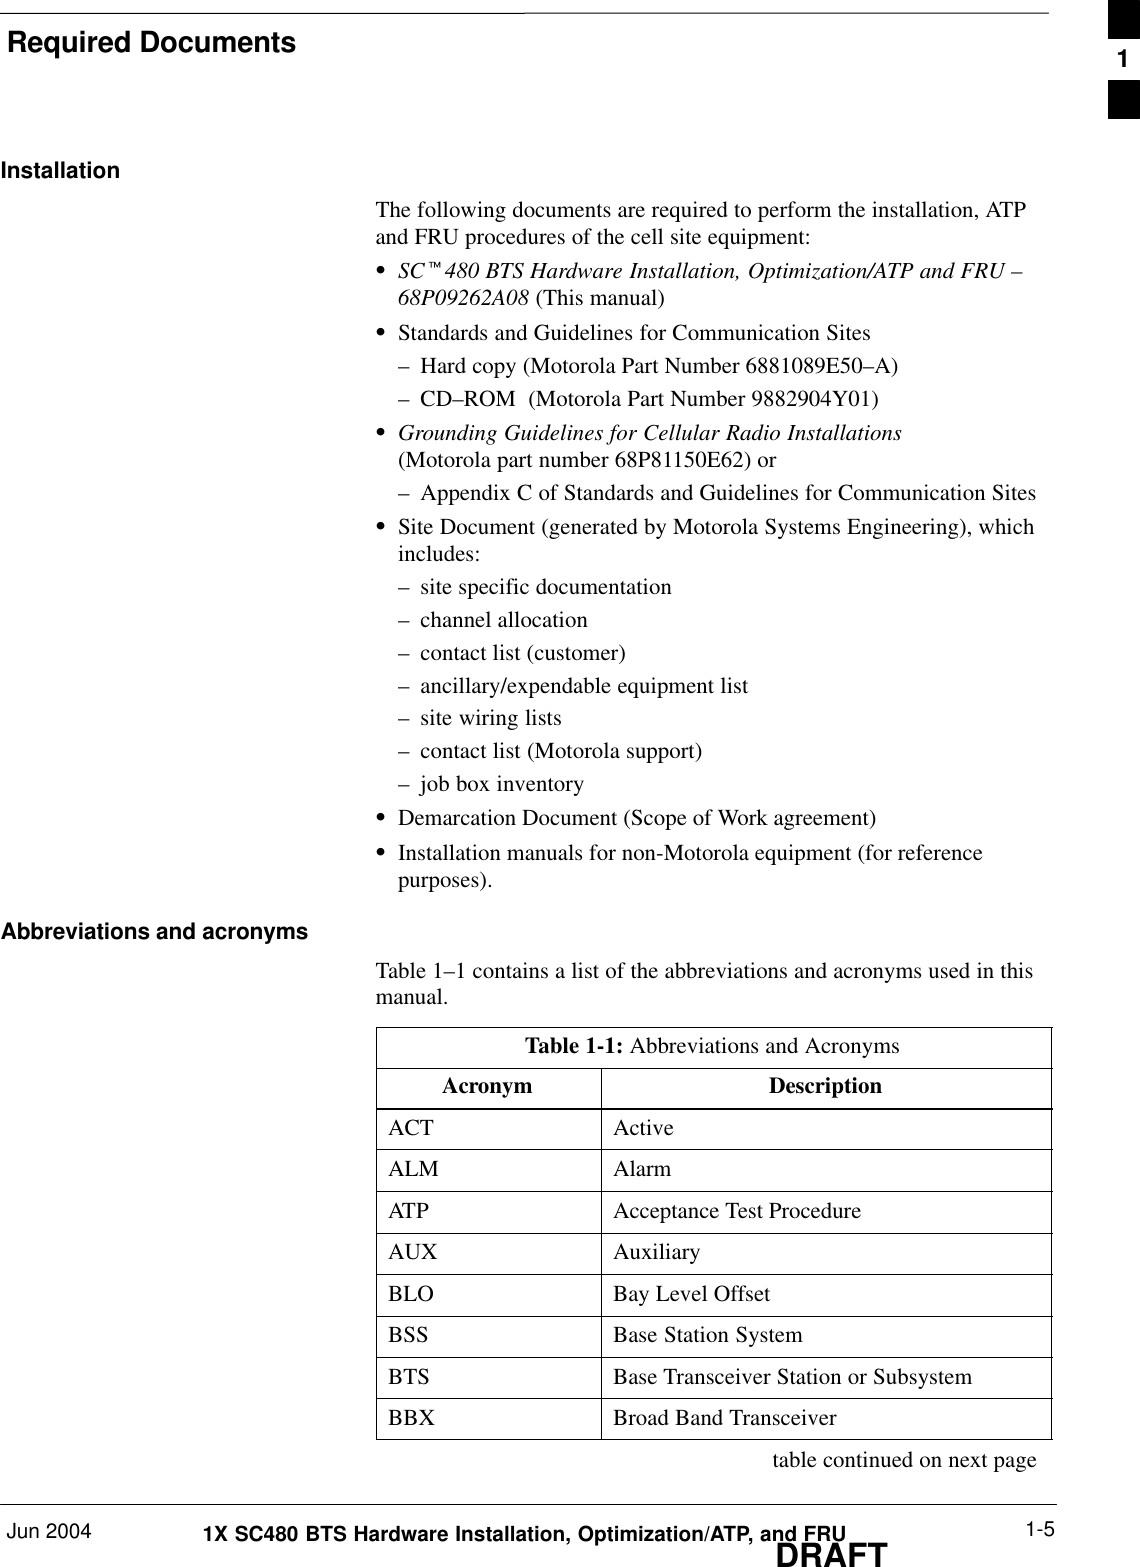 Required DocumentsJun 2004 1-51X SC480 BTS Hardware Installation, Optimization/ATP, and FRUDRAFTInstallationThe following documents are required to perform the installation, ATPand FRU procedures of the cell site equipment:SSCt480 BTS Hardware Installation, Optimization/ATP and FRU –68P09262A08 (This manual)SStandards and Guidelines for Communication Sites– Hard copy (Motorola Part Number 6881089E50–A)– CD–ROM  (Motorola Part Number 9882904Y01)SGrounding Guidelines for Cellular Radio Installations(Motorola part number 68P81150E62) or– Appendix C of Standards and Guidelines for Communication SitesSSite Document (generated by Motorola Systems Engineering), whichincludes:– site specific documentation– channel allocation– contact list (customer)– ancillary/expendable equipment list– site wiring lists– contact list (Motorola support)– job box inventorySDemarcation Document (Scope of Work agreement)SInstallation manuals for non-Motorola equipment (for referencepurposes).Abbreviations and acronymsTable 1–1 contains a list of the abbreviations and acronyms used in thismanual.Table 1-1: Abbreviations and AcronymsAcronym DescriptionACT ActiveALM AlarmATP Acceptance Test ProcedureAUX AuxiliaryBLO Bay Level OffsetBSS Base Station SystemBTS Base Transceiver Station or SubsystemBBX Broad Band Transceivertable continued on next page1